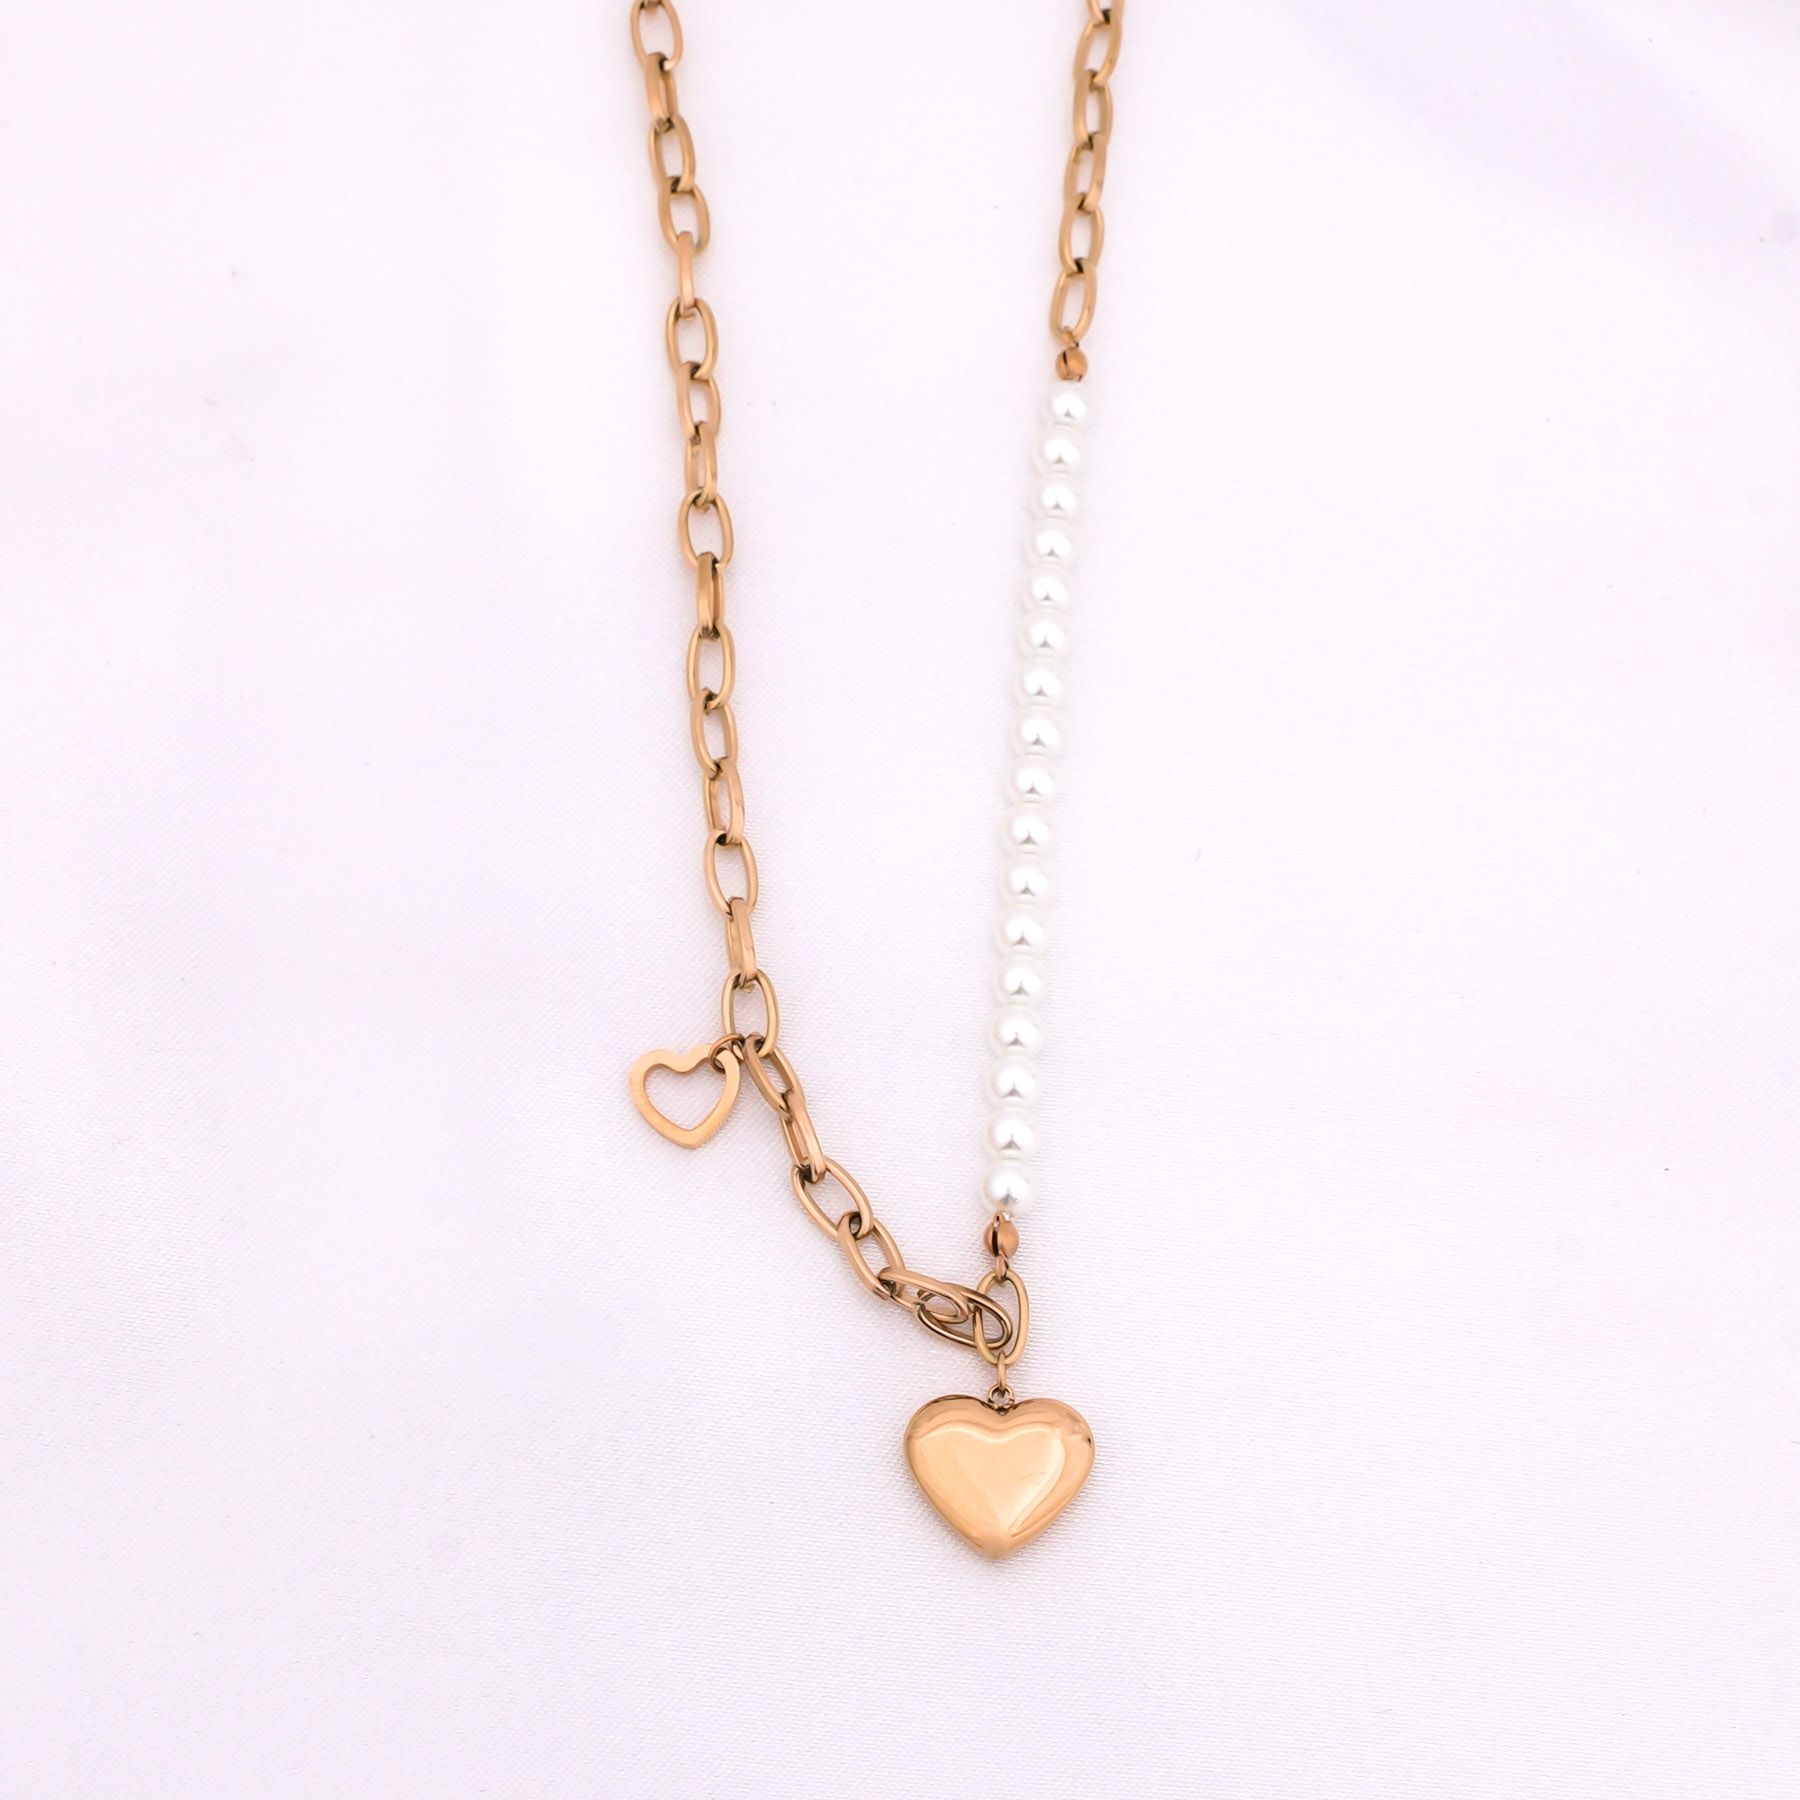 HEART AND SOUL NECKLACE - ROSE GOLD ' - ' ΜΕΝΤΑΓΙΟΝ